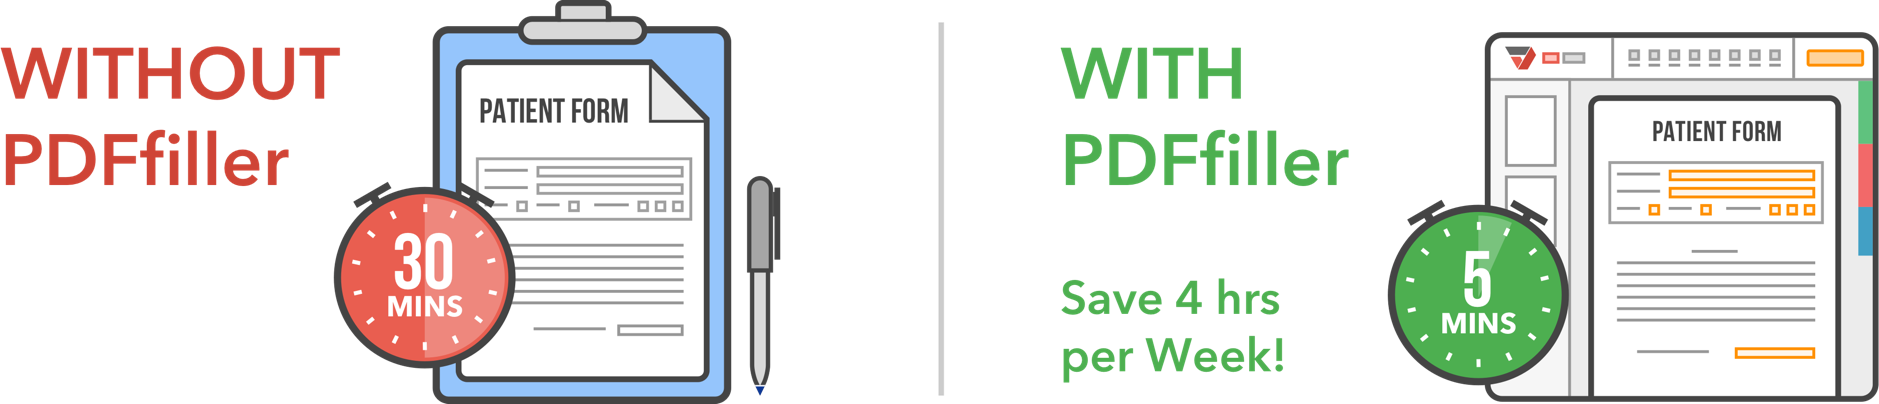 Clocks with different minutes on top of forms in meaning of saved time with pdffiller service